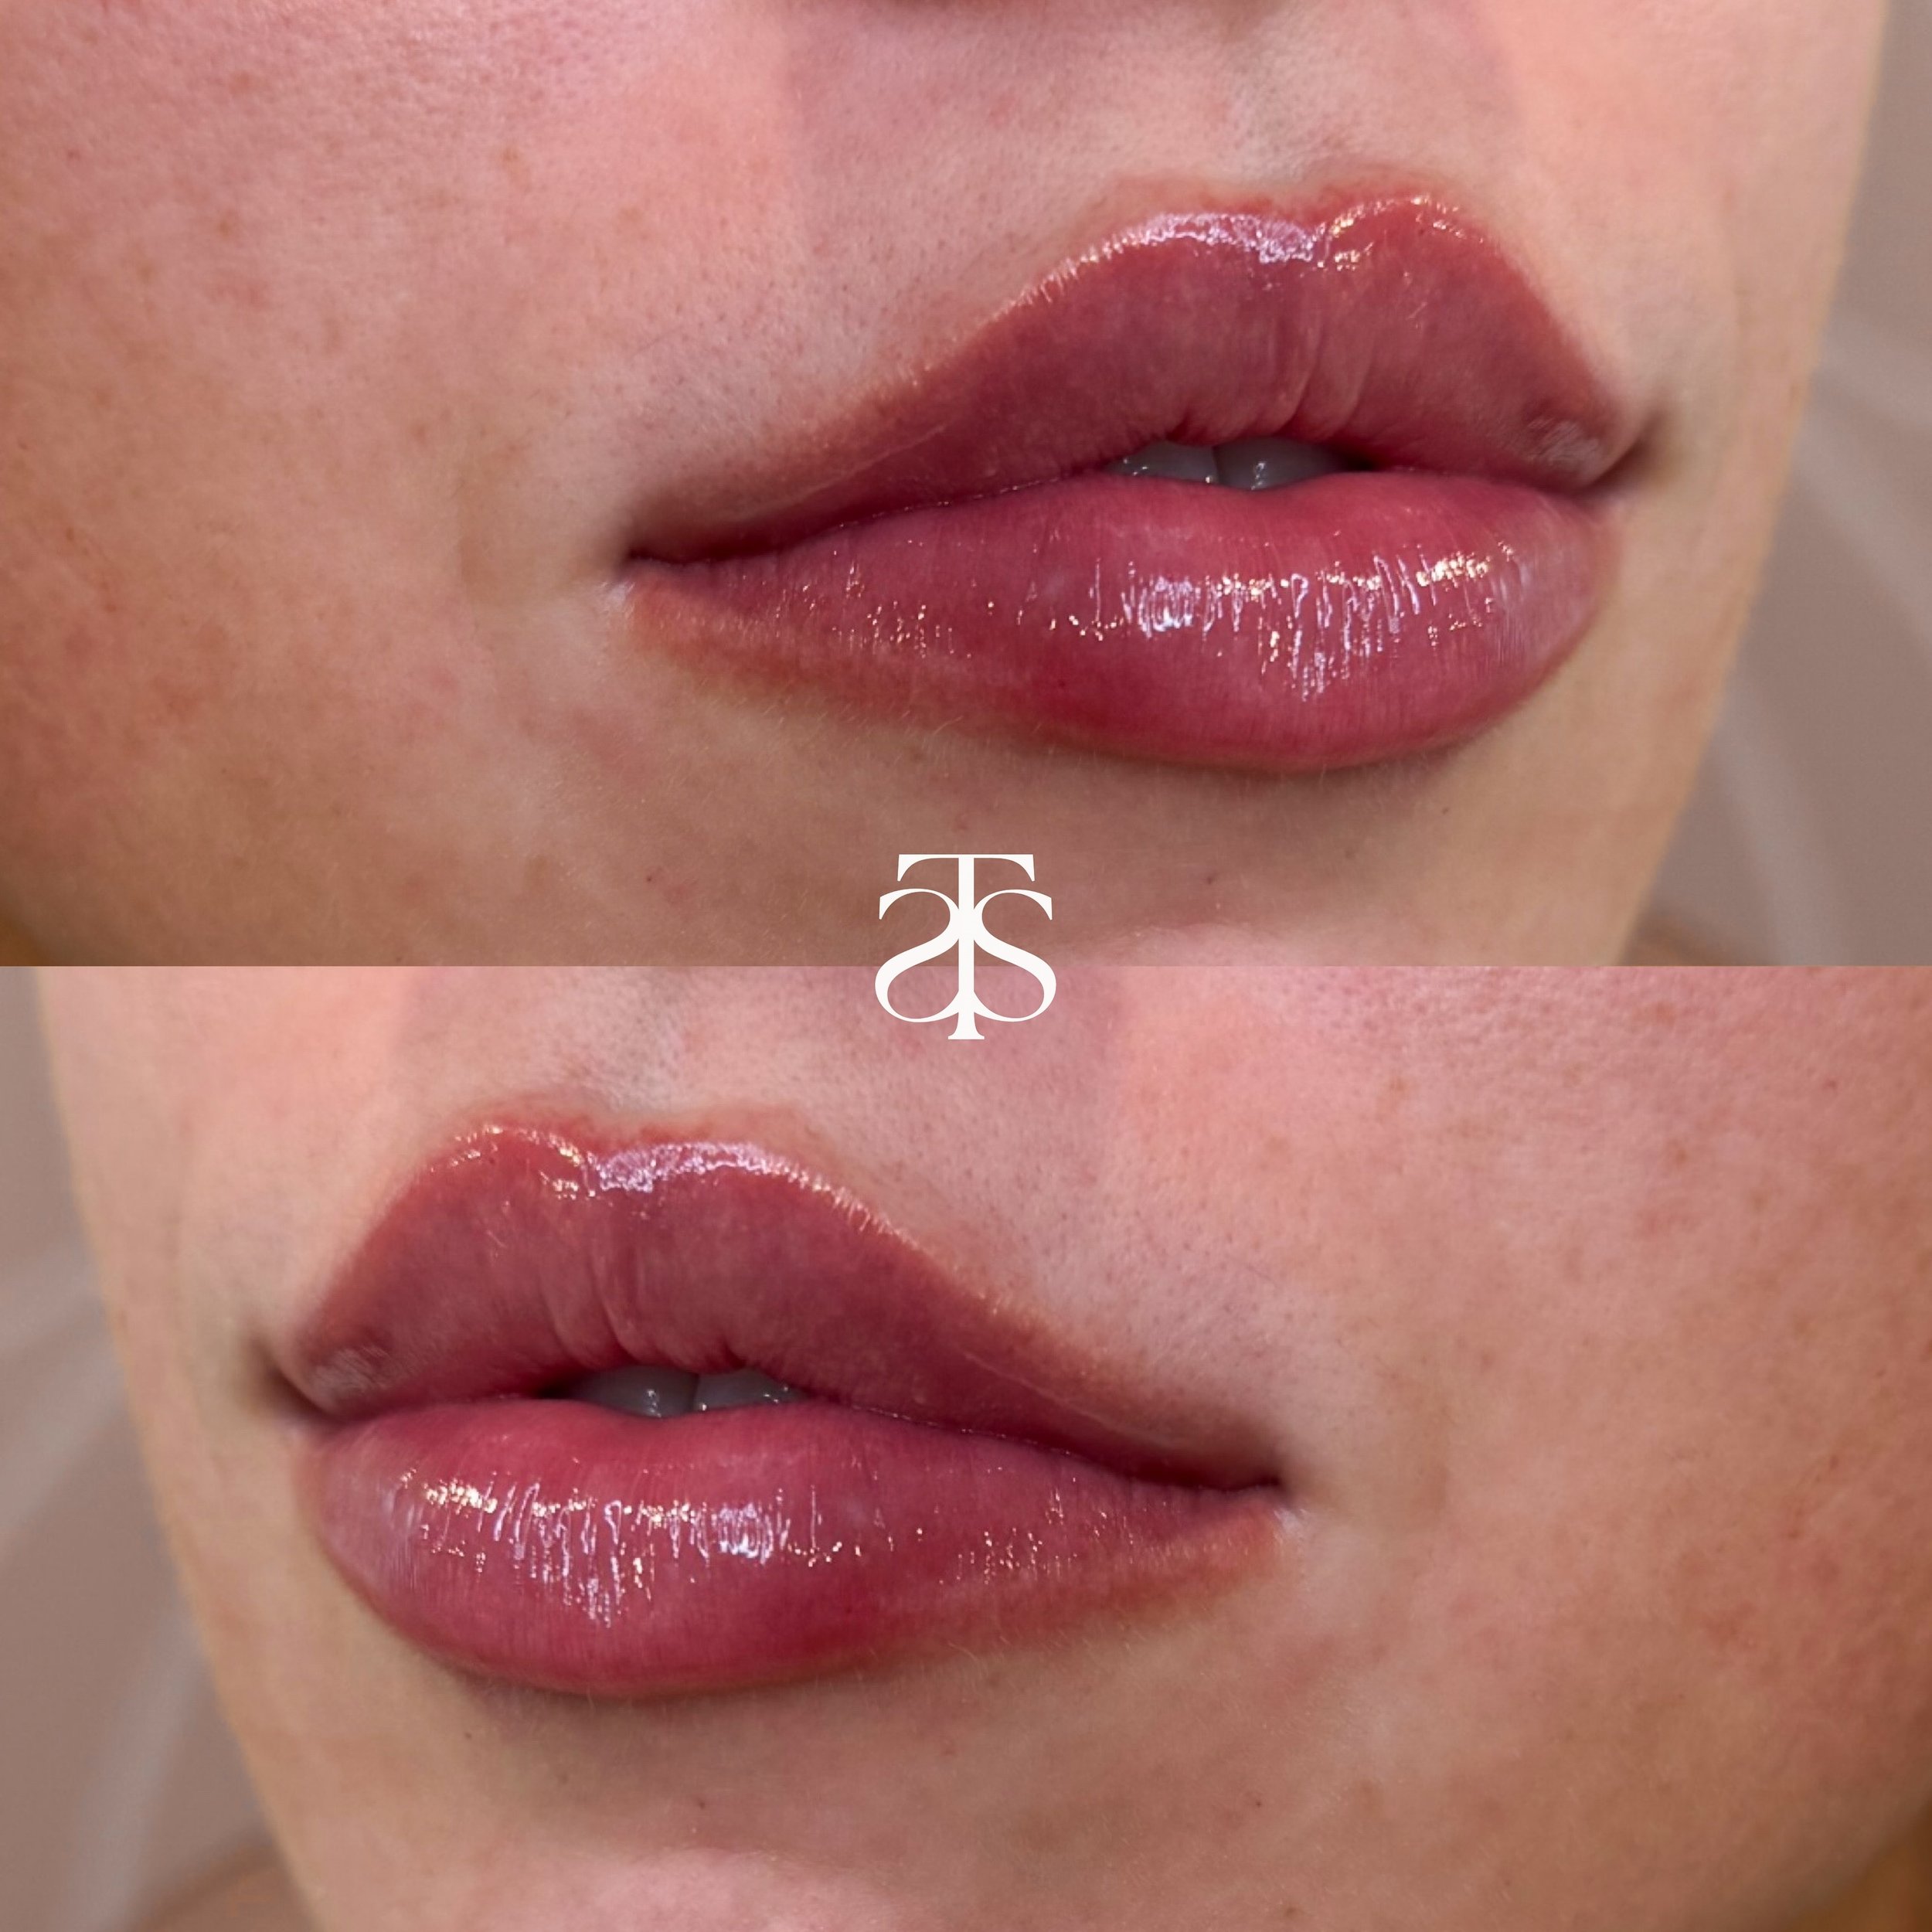 ✨Top Lip filler questions✨

💫What are lip fillers made of?
Lip fillers are made of hyaluronic acid, which is a naturally occurring substance in the body. Hyaluronic acid fillers work by retaining moisture in the skin to increase the volume, shape an